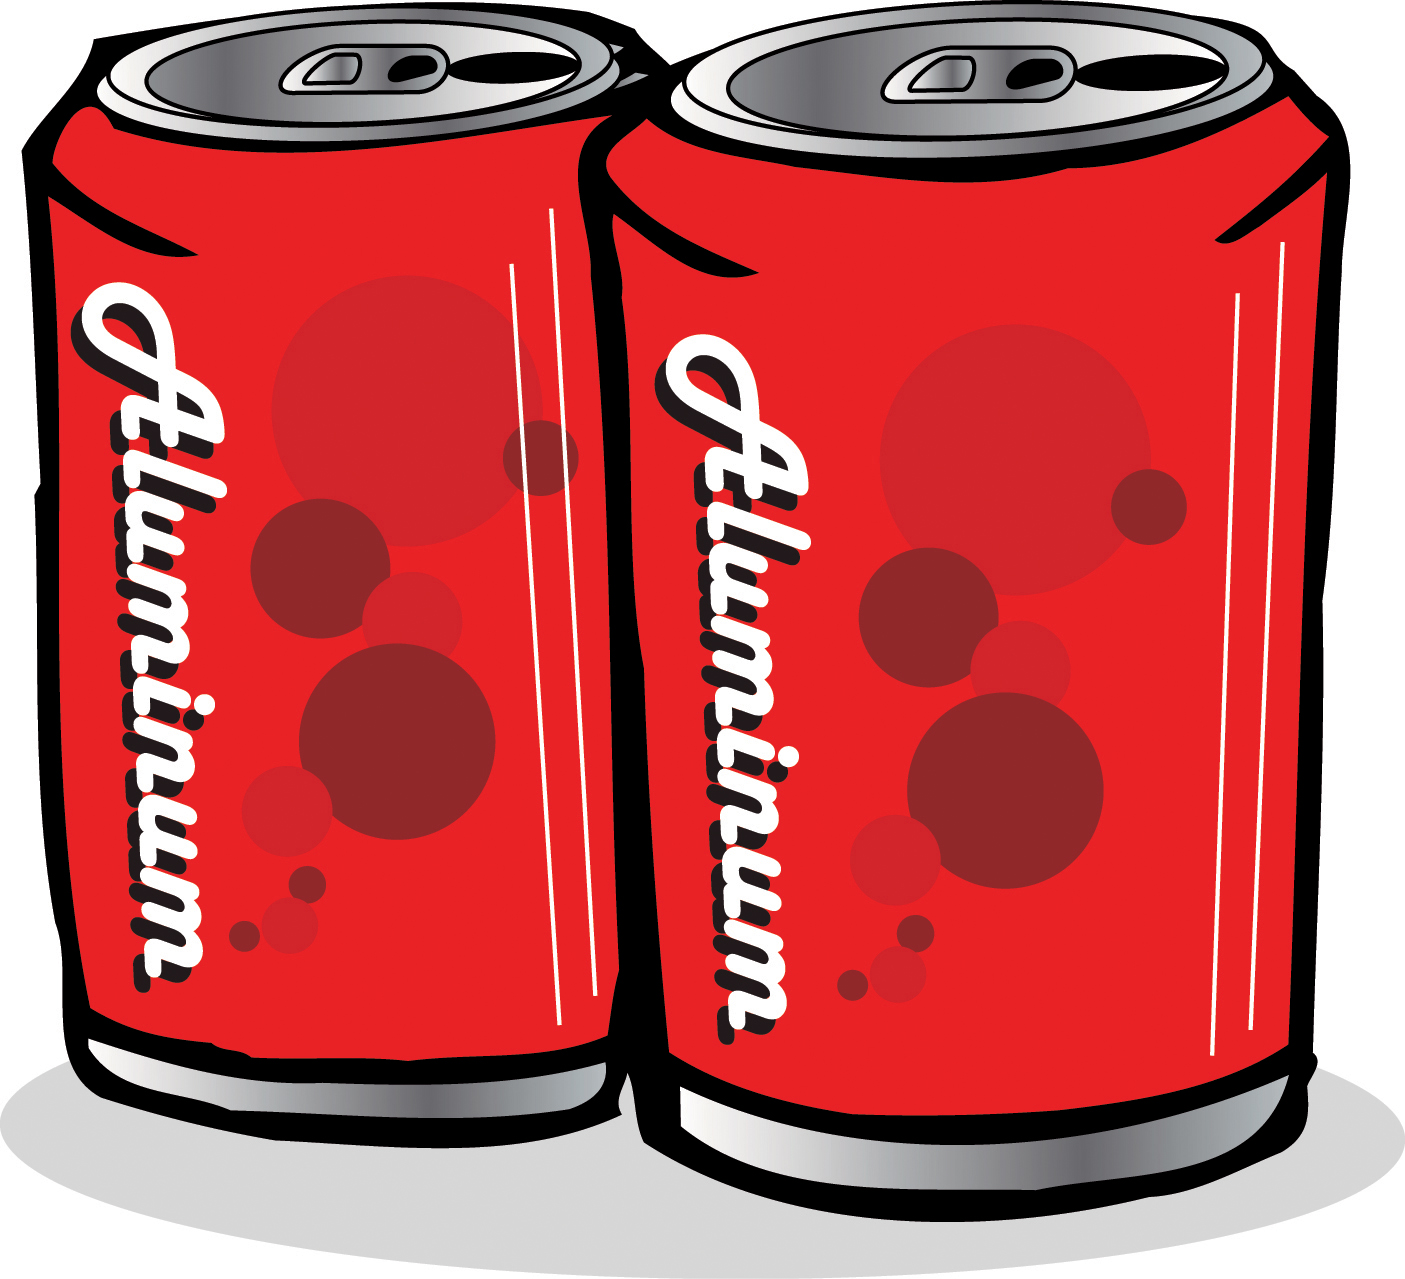 Aluminum cans clipart clipart images gallery for free